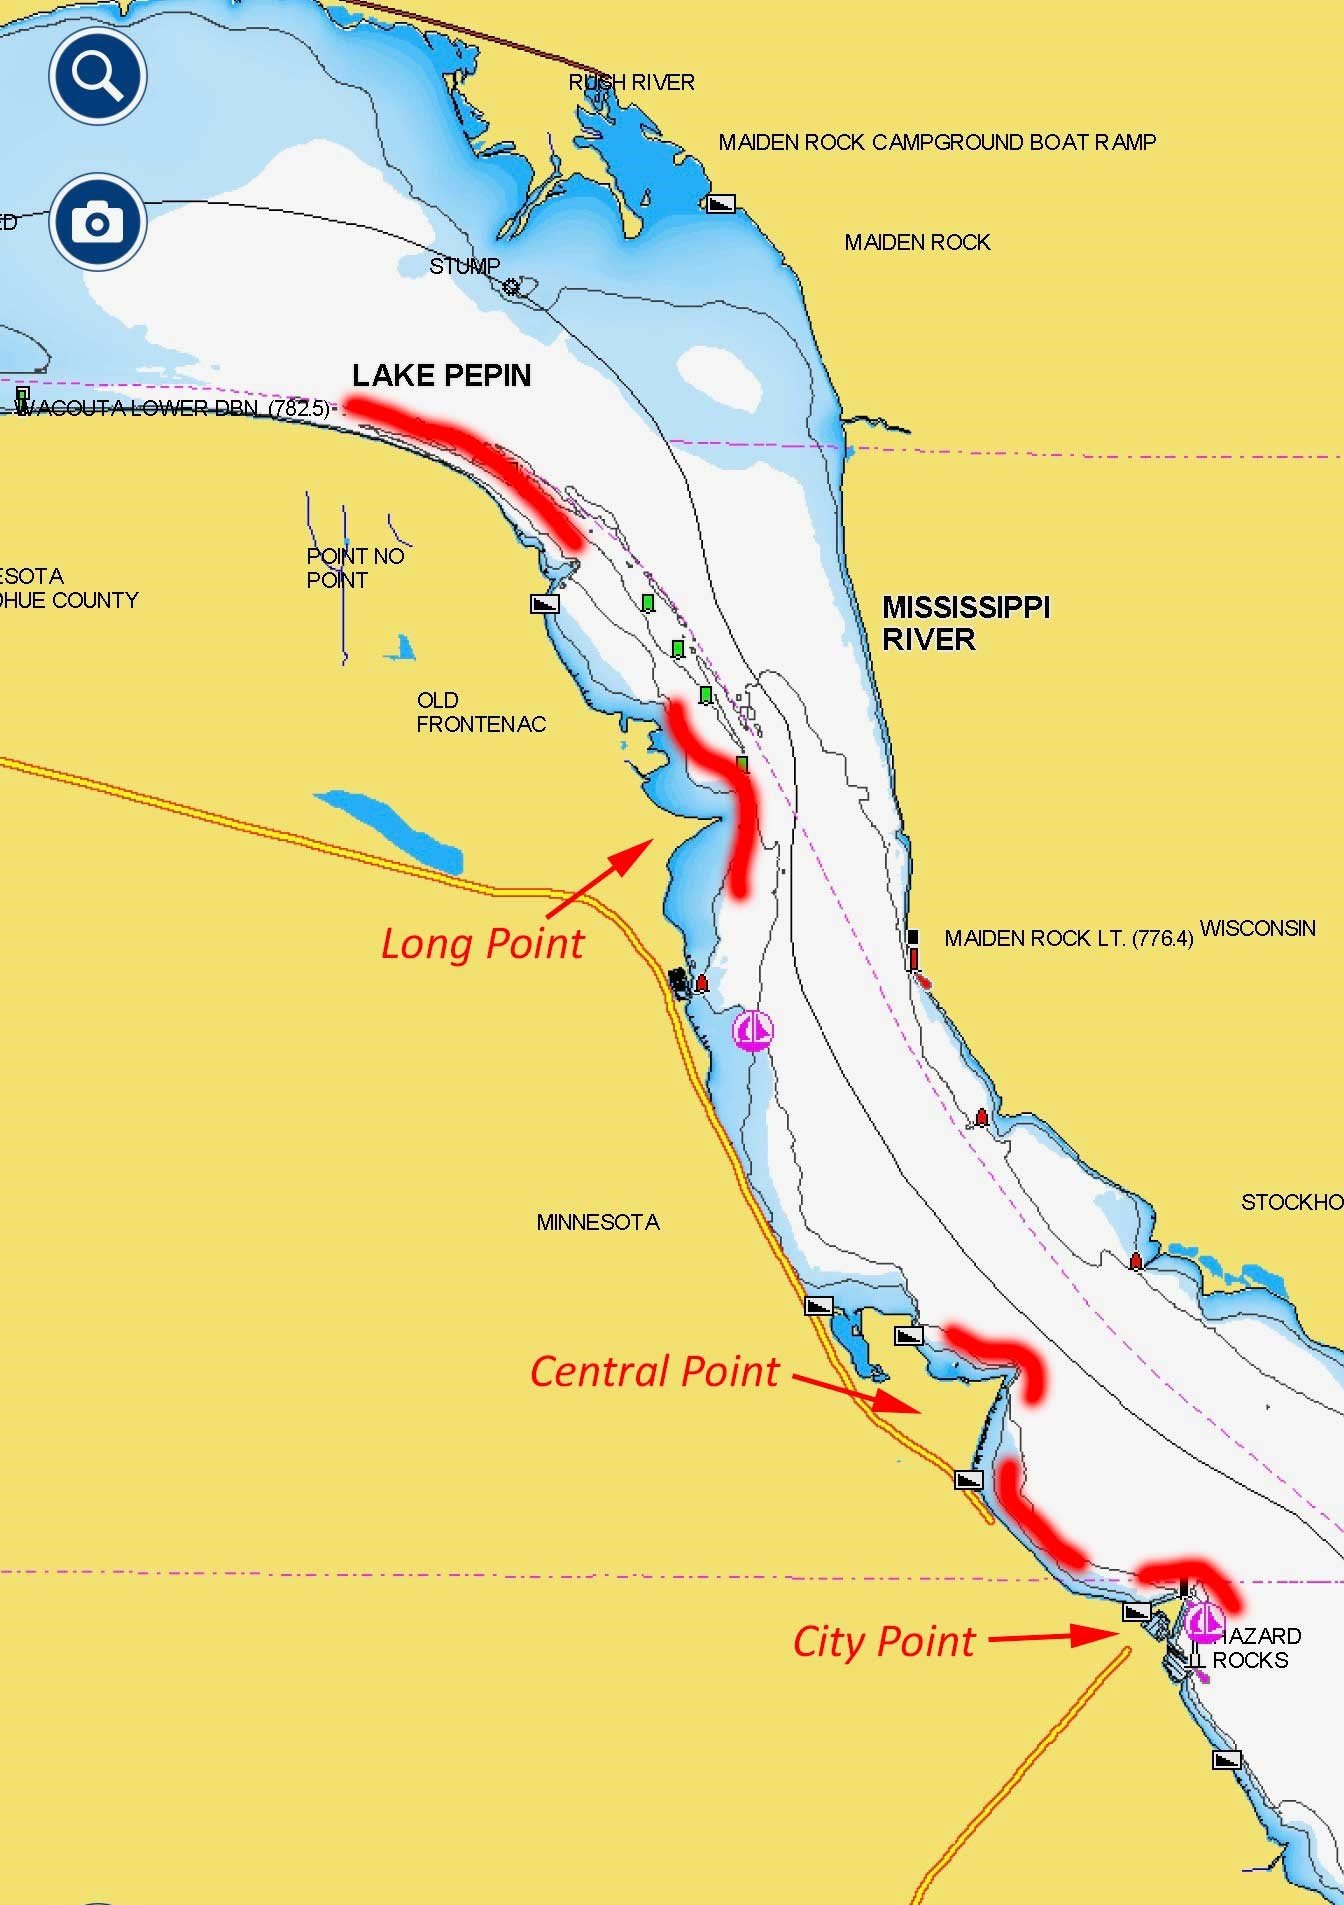 Maiden Rock area of Lake Pepin with fishing spots marked on a lake map.